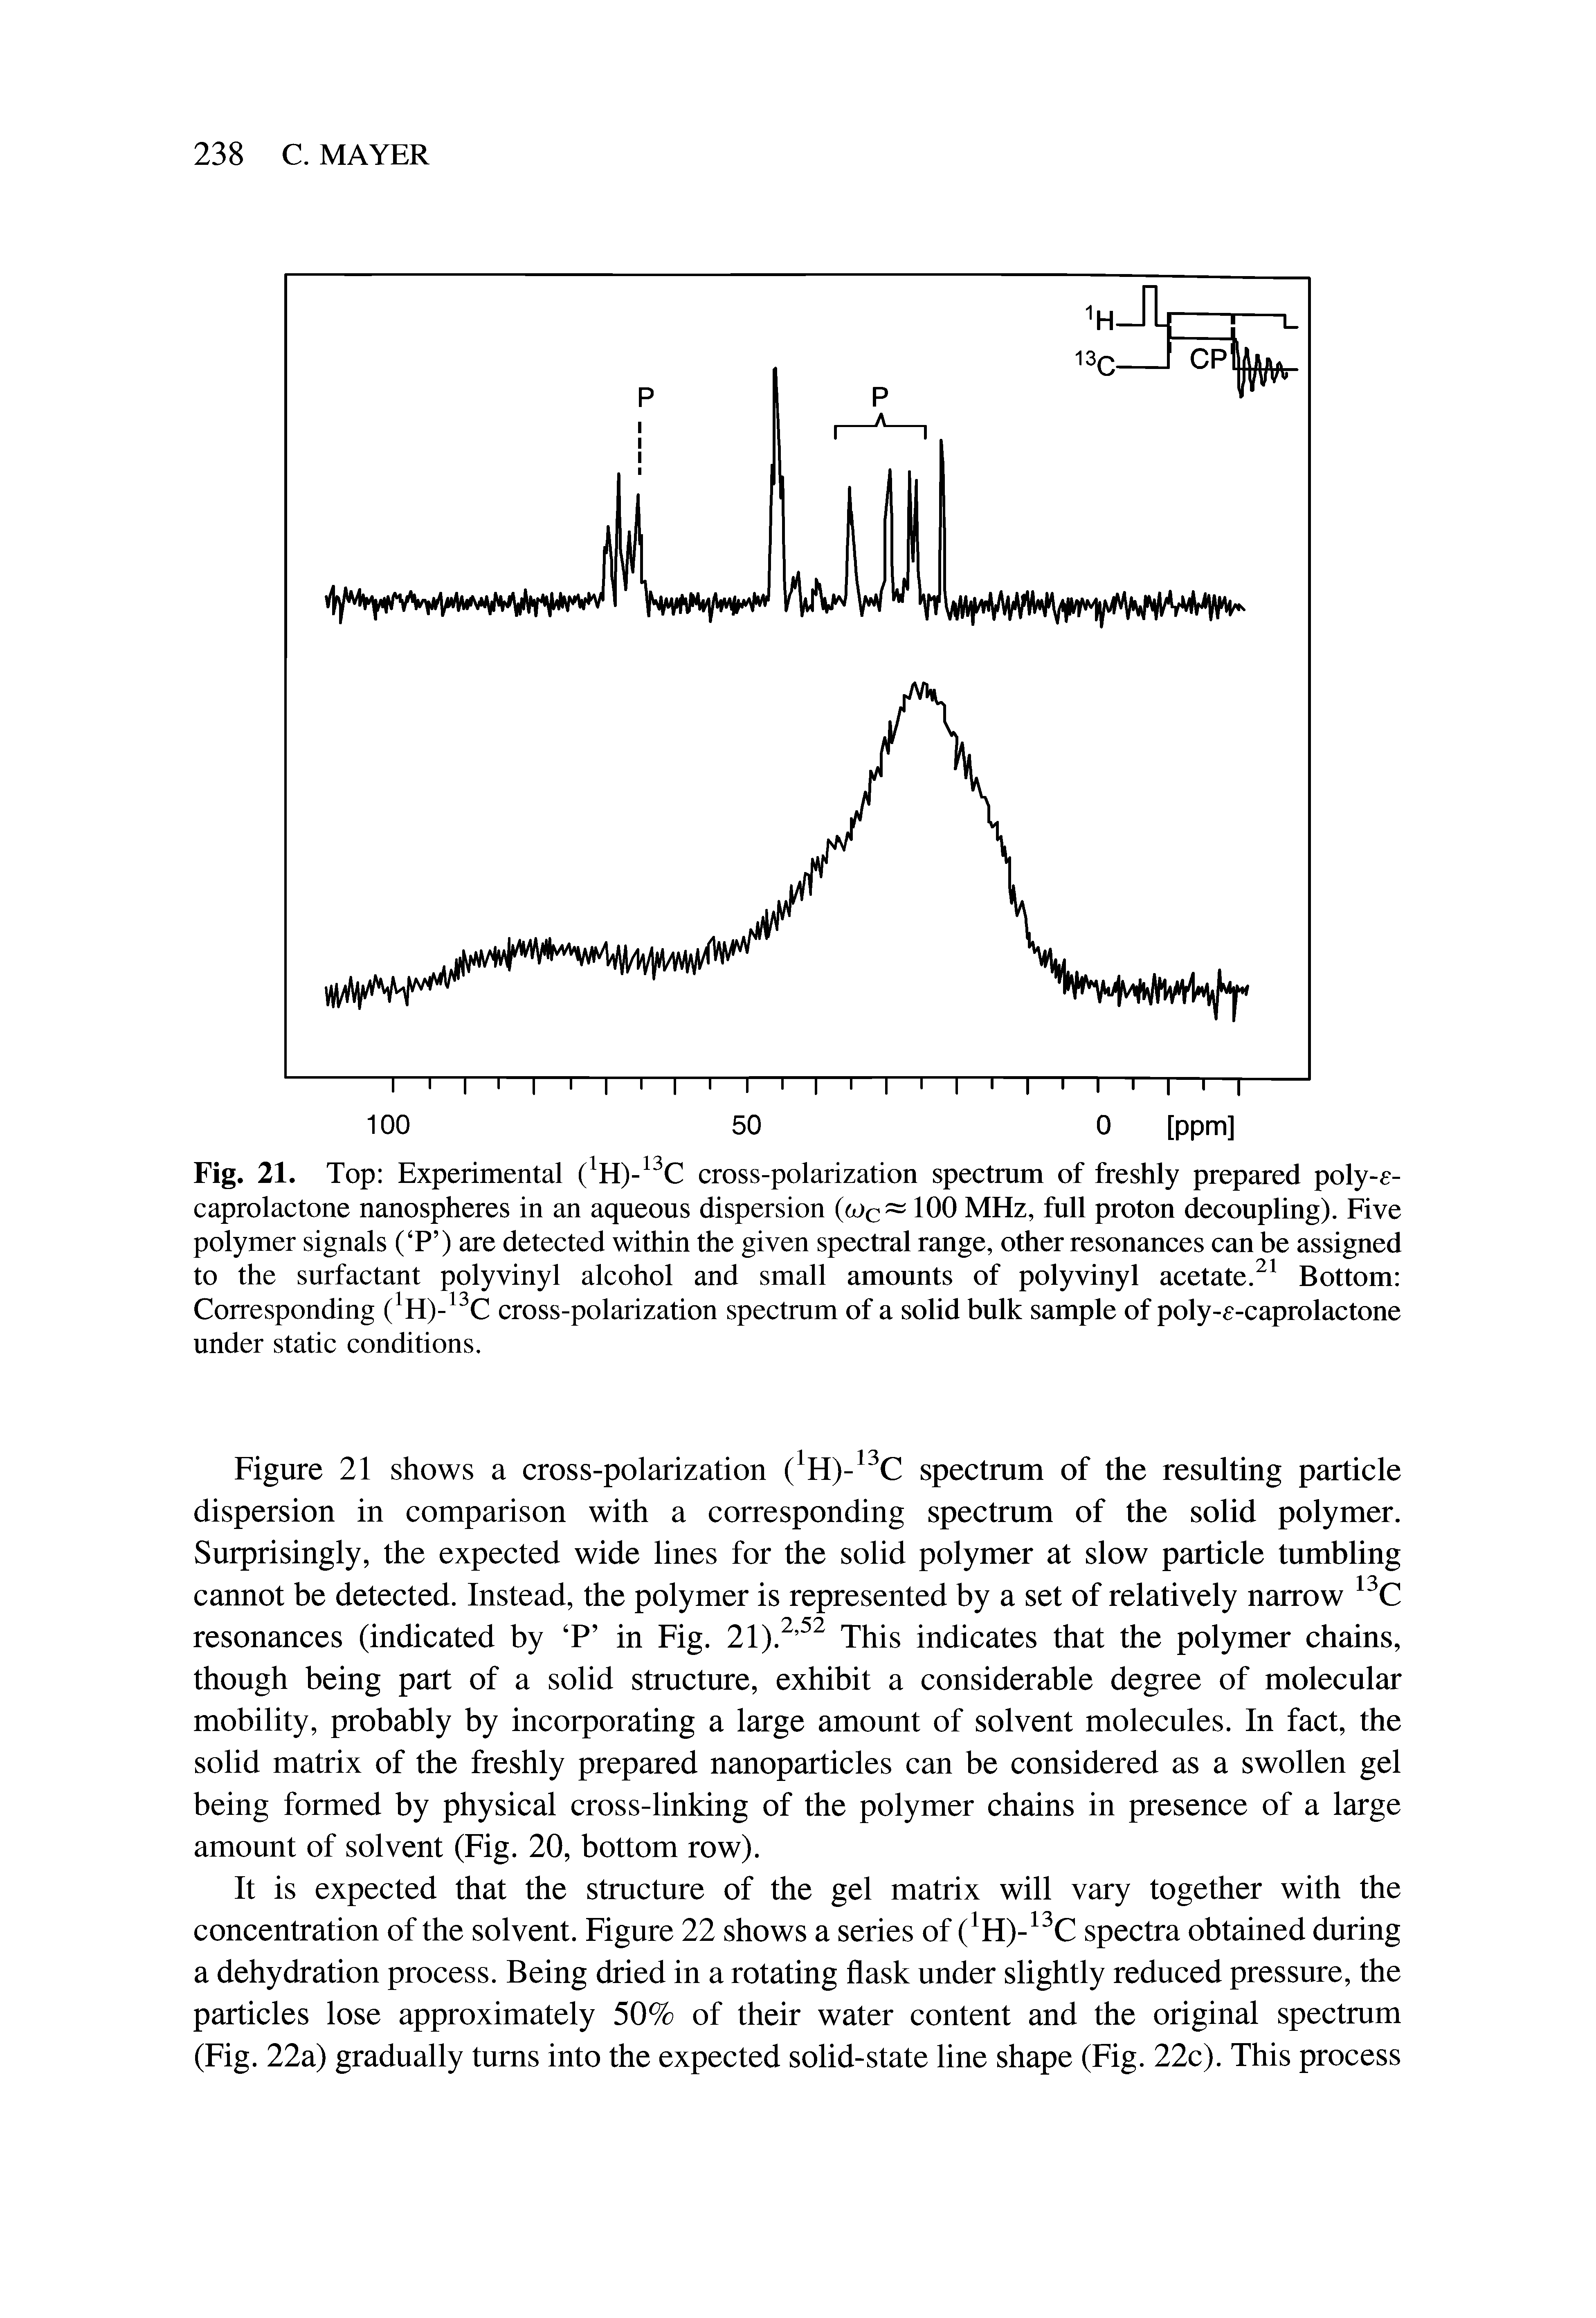 Fig. 21. Top Experimental ( H)- C cross-polarization spectrum of freshly prepared poly-e-caprolactone nanospheres in an aqueous dispersion (wc—100 MHz, full proton decoupling). Five polymer signals ( P ) are detected within the given spectral range, other resonances can be assigned to the surfactant polyvinyl alcohol and small amounts of polyvinyl acetate. Bottom Corresponding ( H)- C cross-polarization spectrum of a solid bulk sample of poly-f-caprolactone under static conditions.